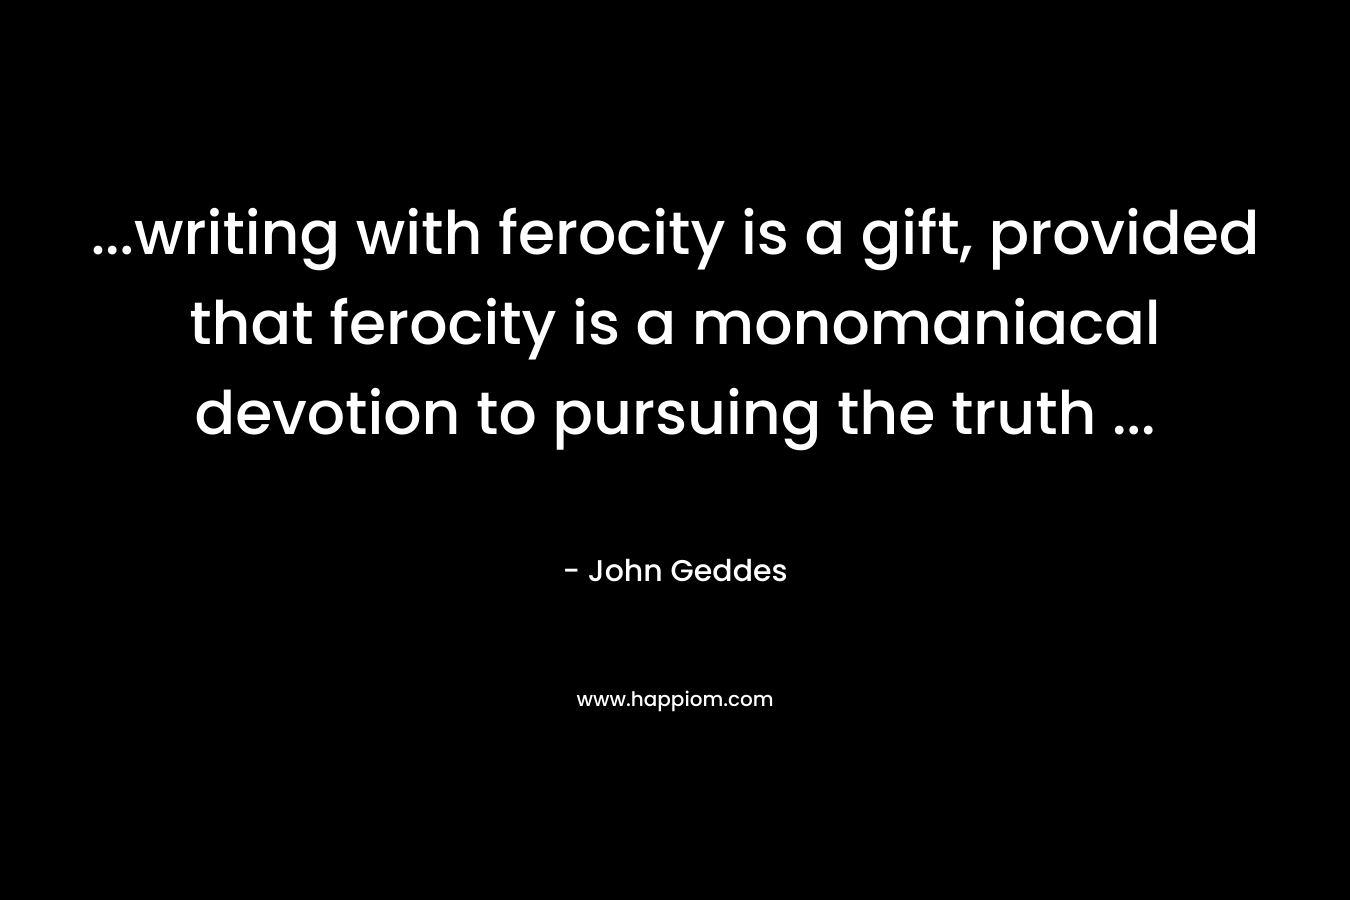 …writing with ferocity is a gift, provided that ferocity is a monomaniacal devotion to pursuing the truth … – John Geddes